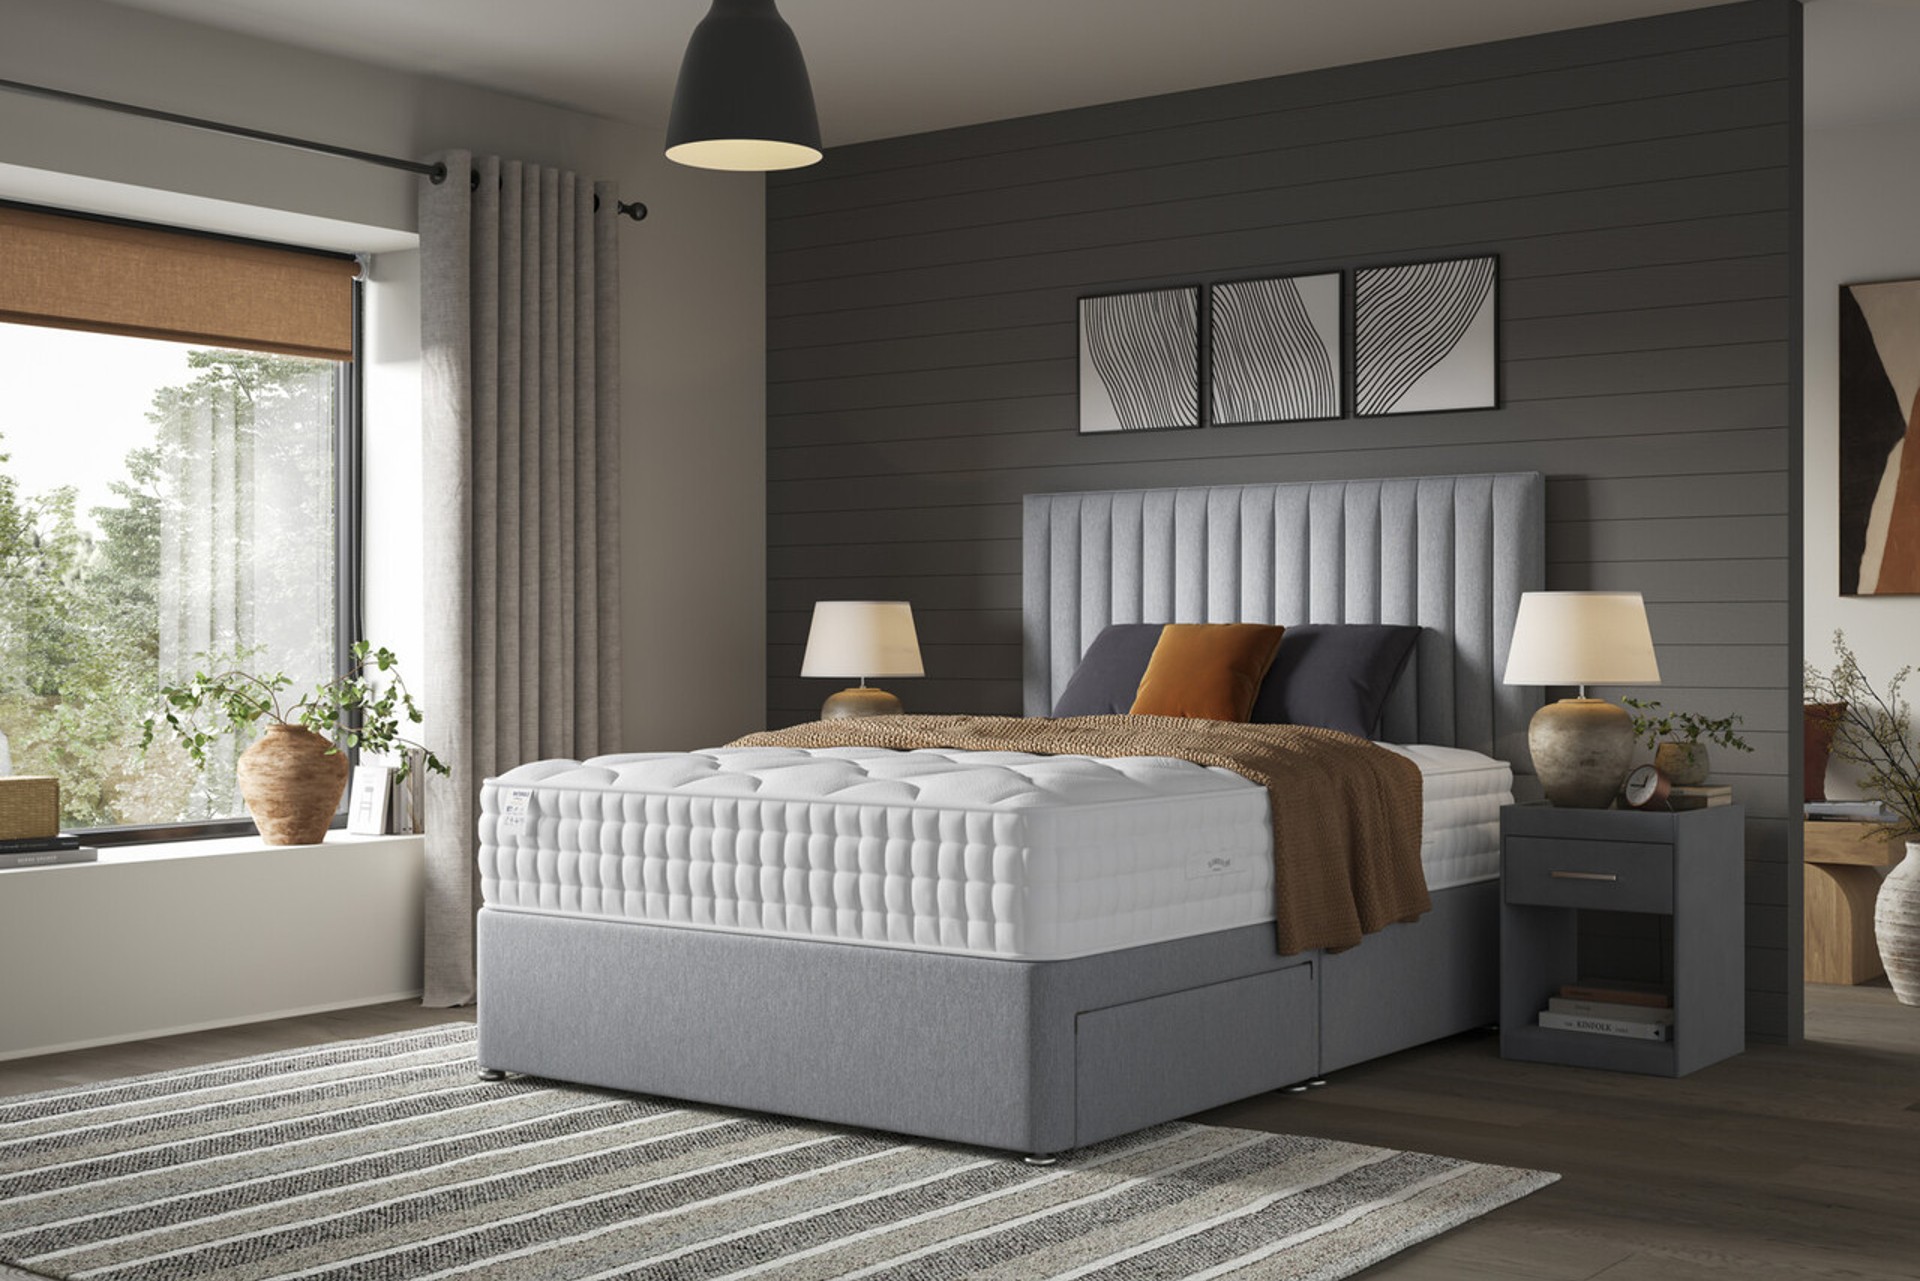 The Ultimate wool mattress on a light grey divan bed base set in a bedroom against a dark grey feature wall